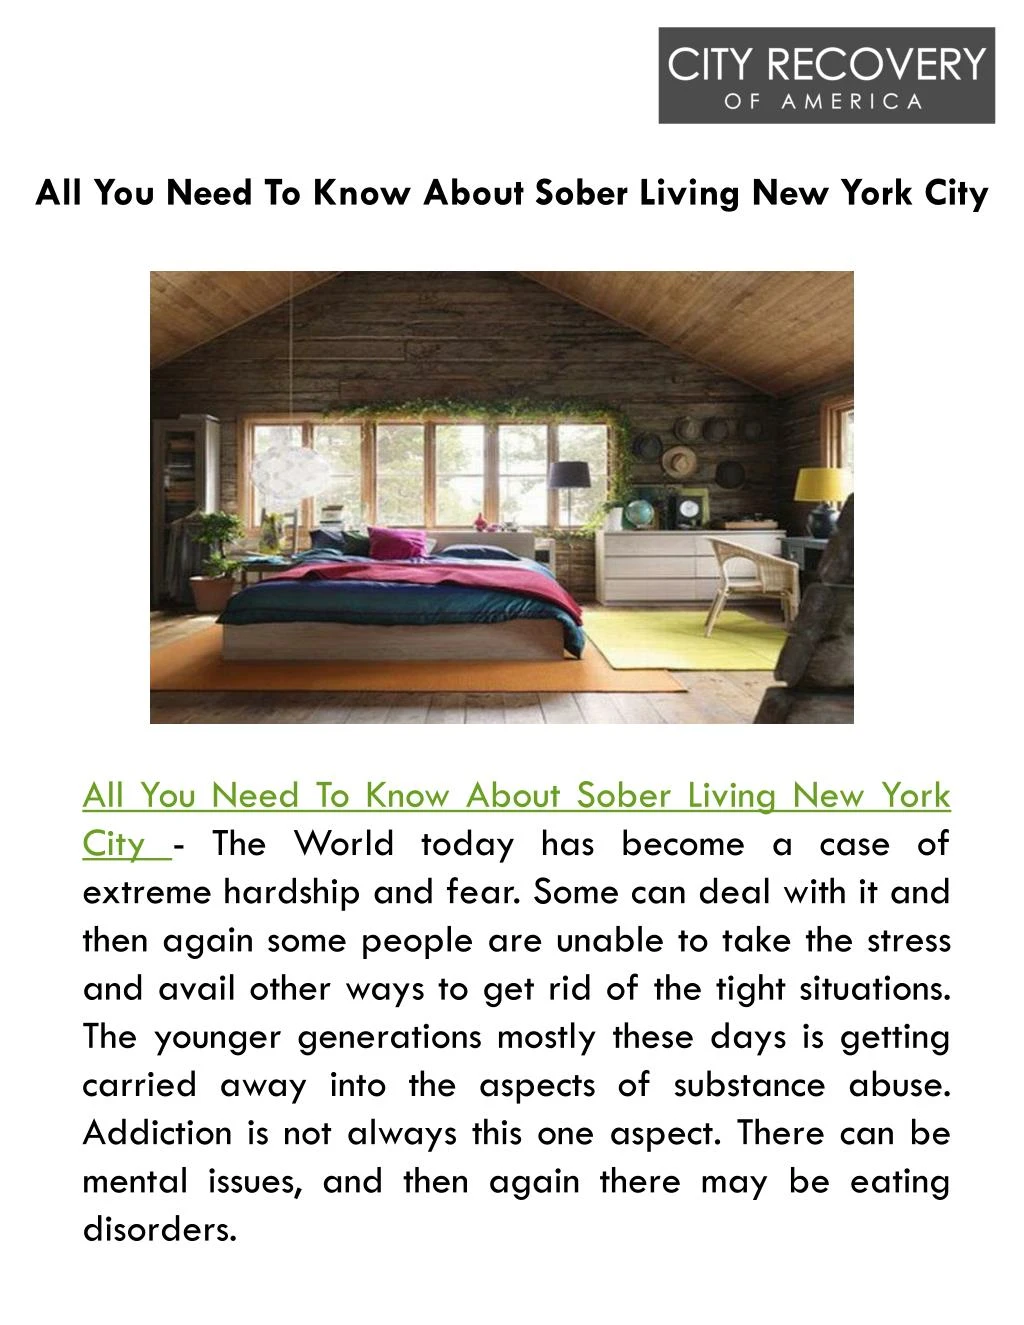 all you need to know about sober living new york